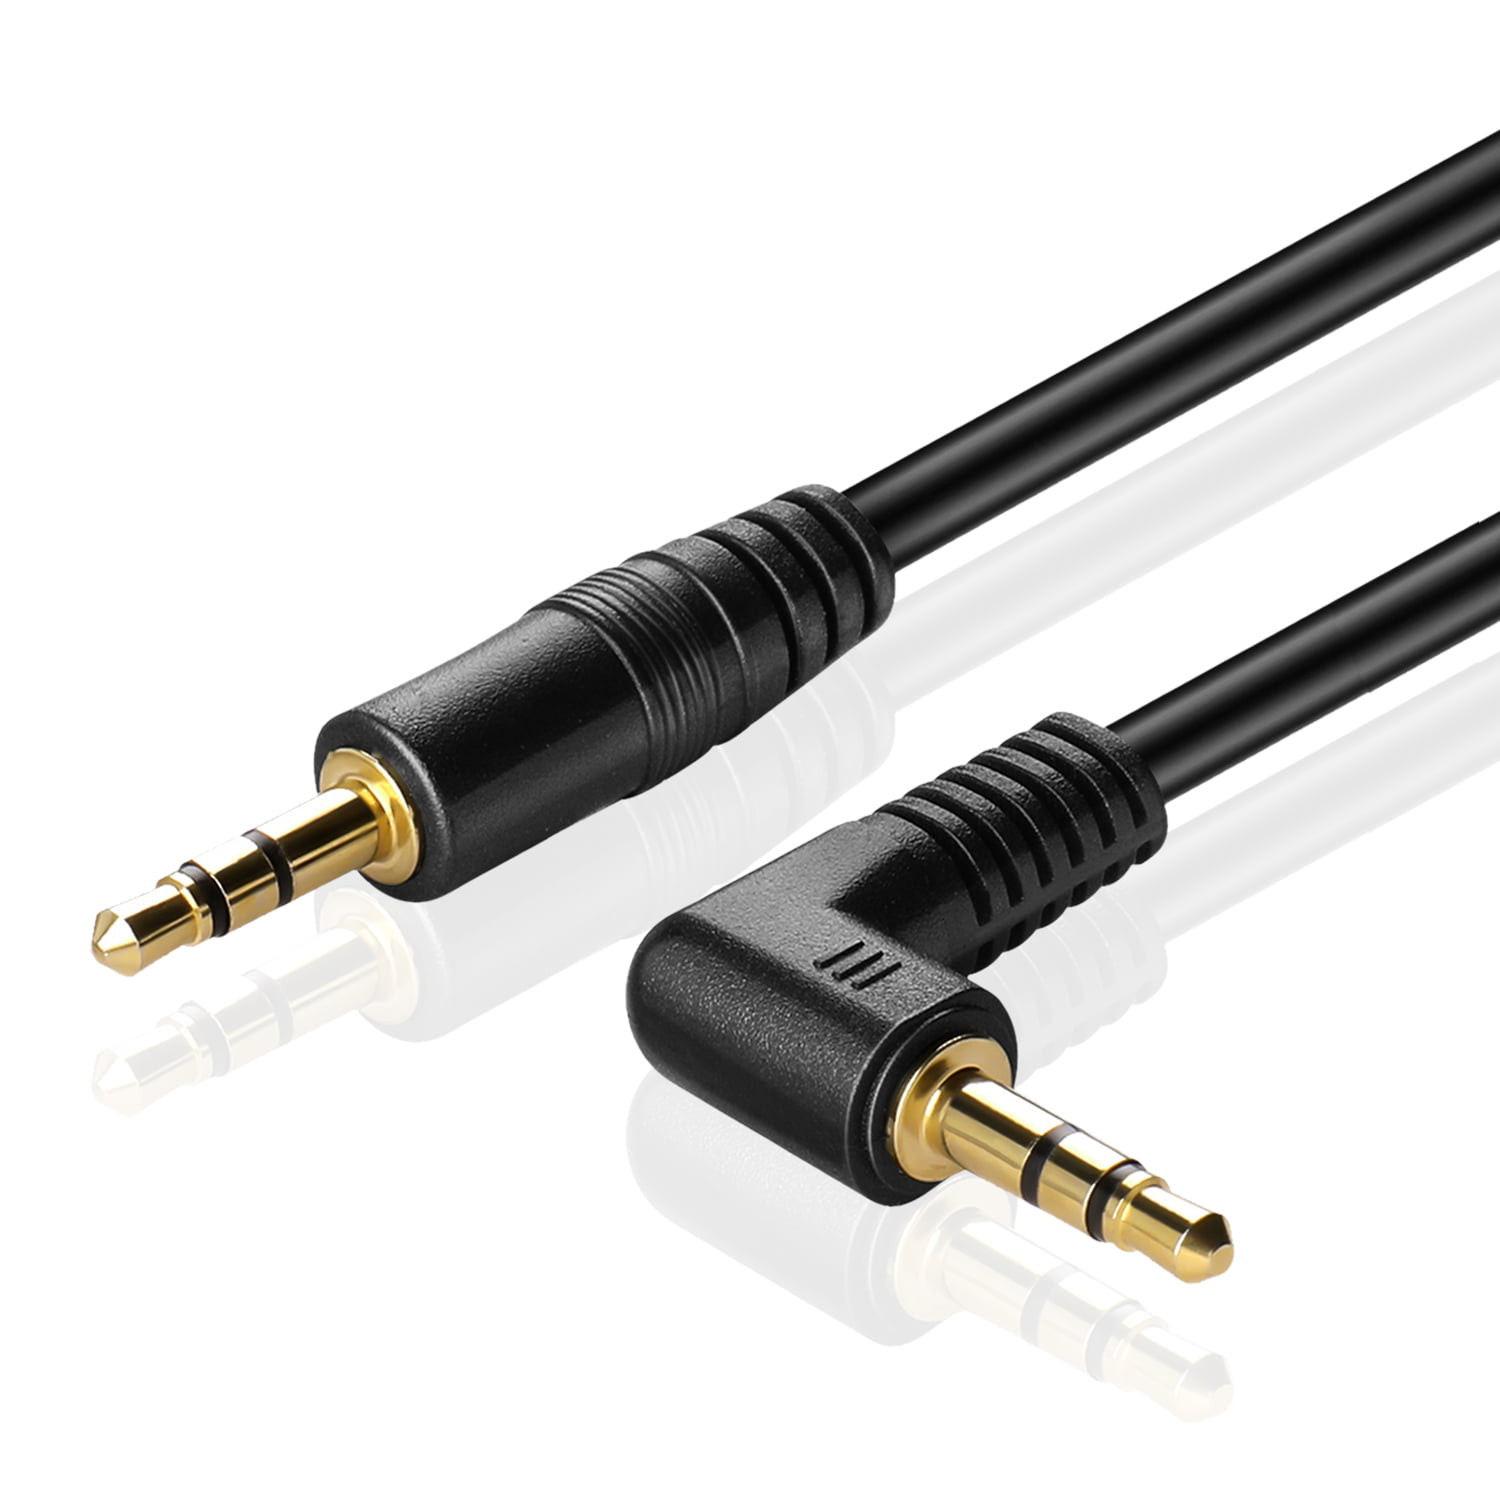 Stereo Right Angled Male Jack to Straight Male Jack Cable 3.5mm Black Wholesale 